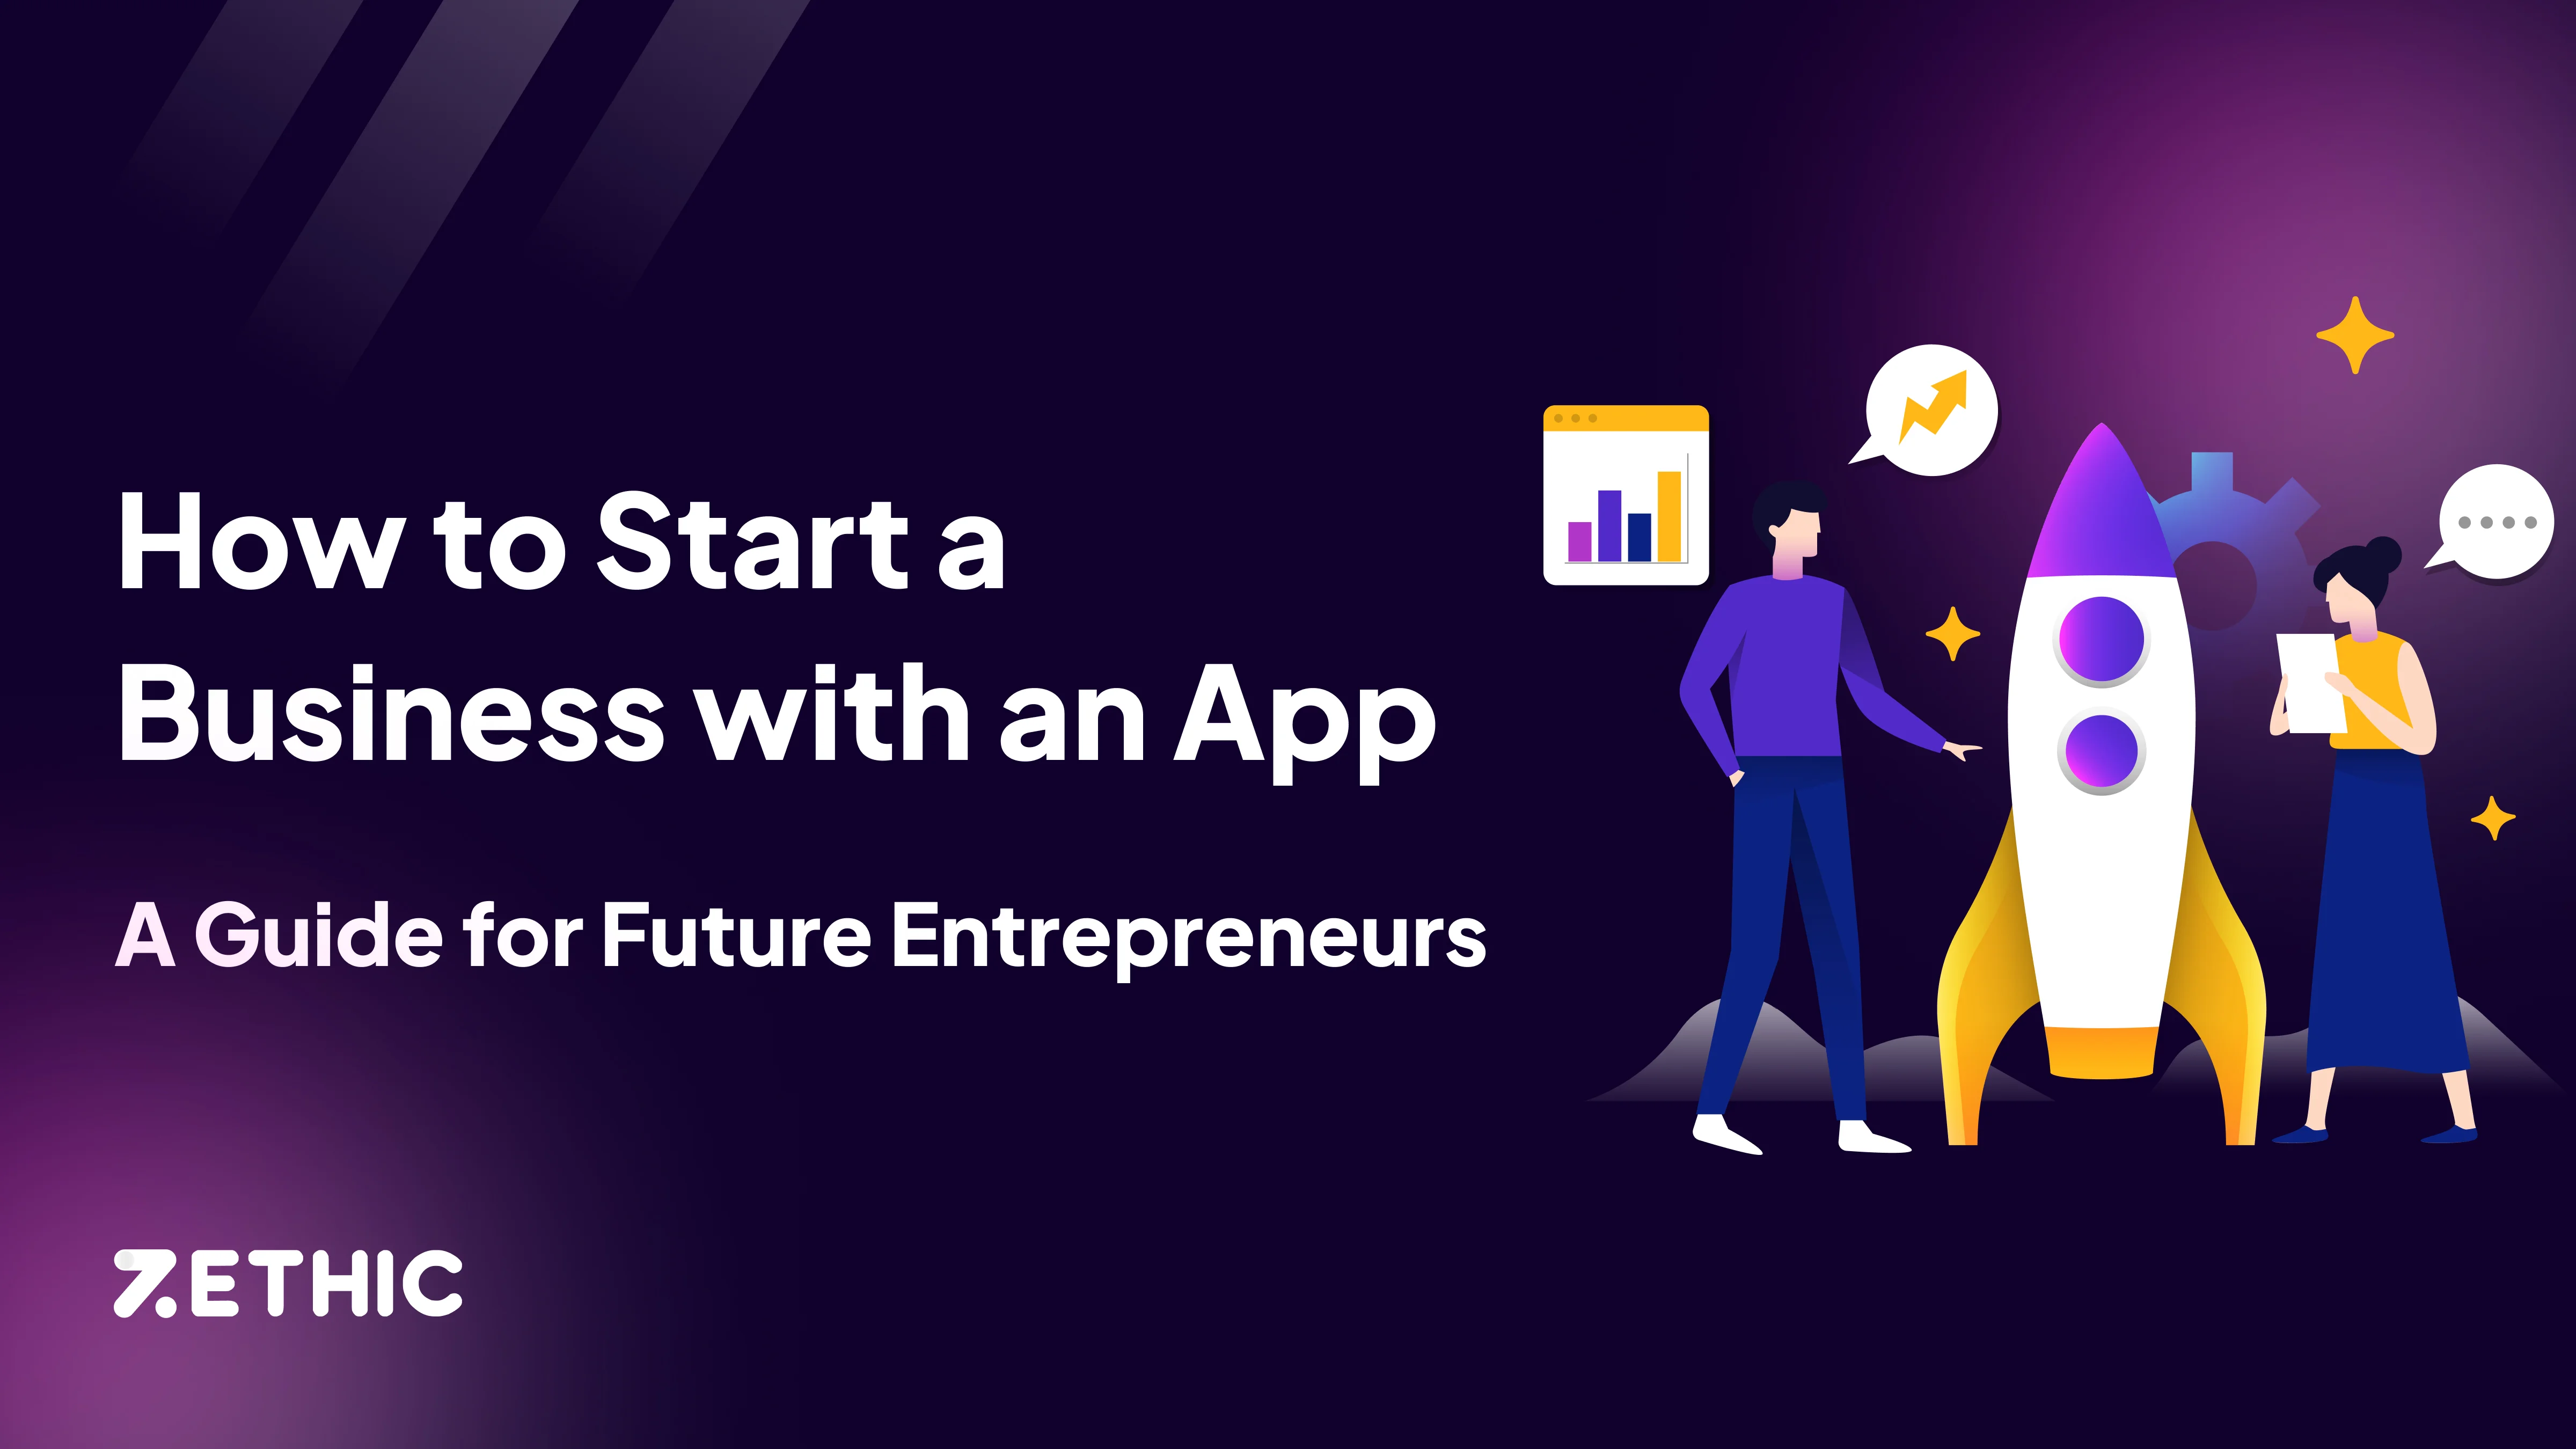 How to Start a Business with an App - A Guide for Future Entrepreneurs